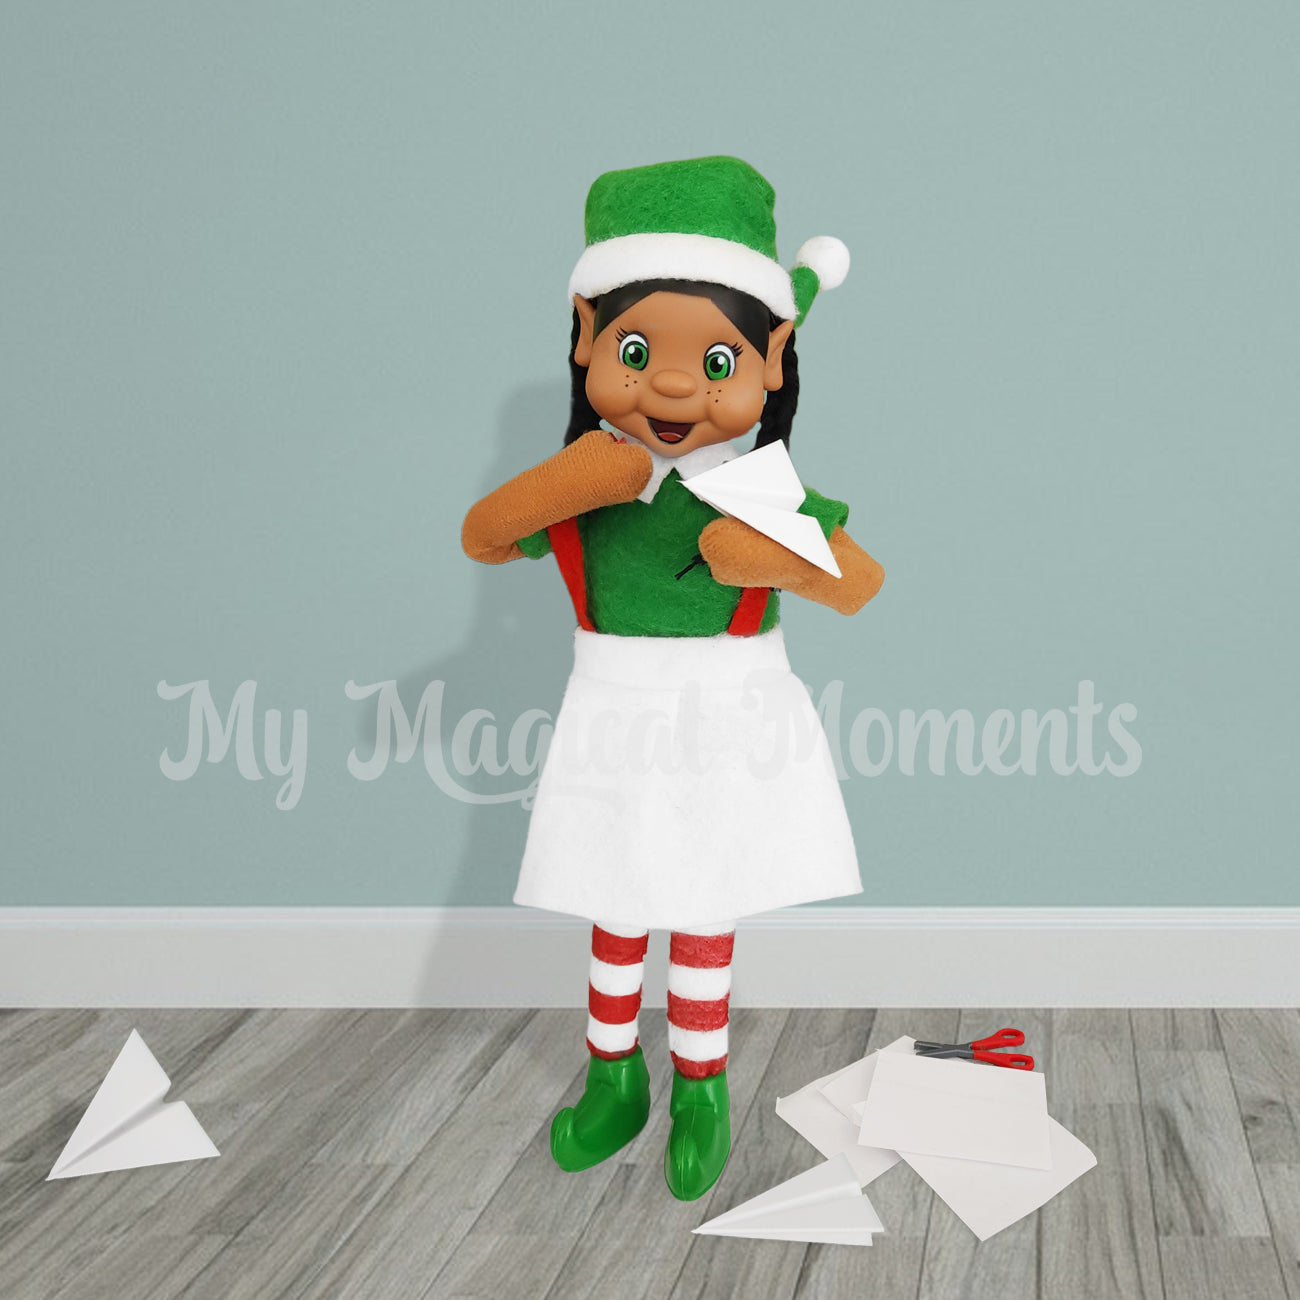 An elf scene with my elf friends black haired girl, holding a paper airplane prop. With paper and miniature scissors on the floor.